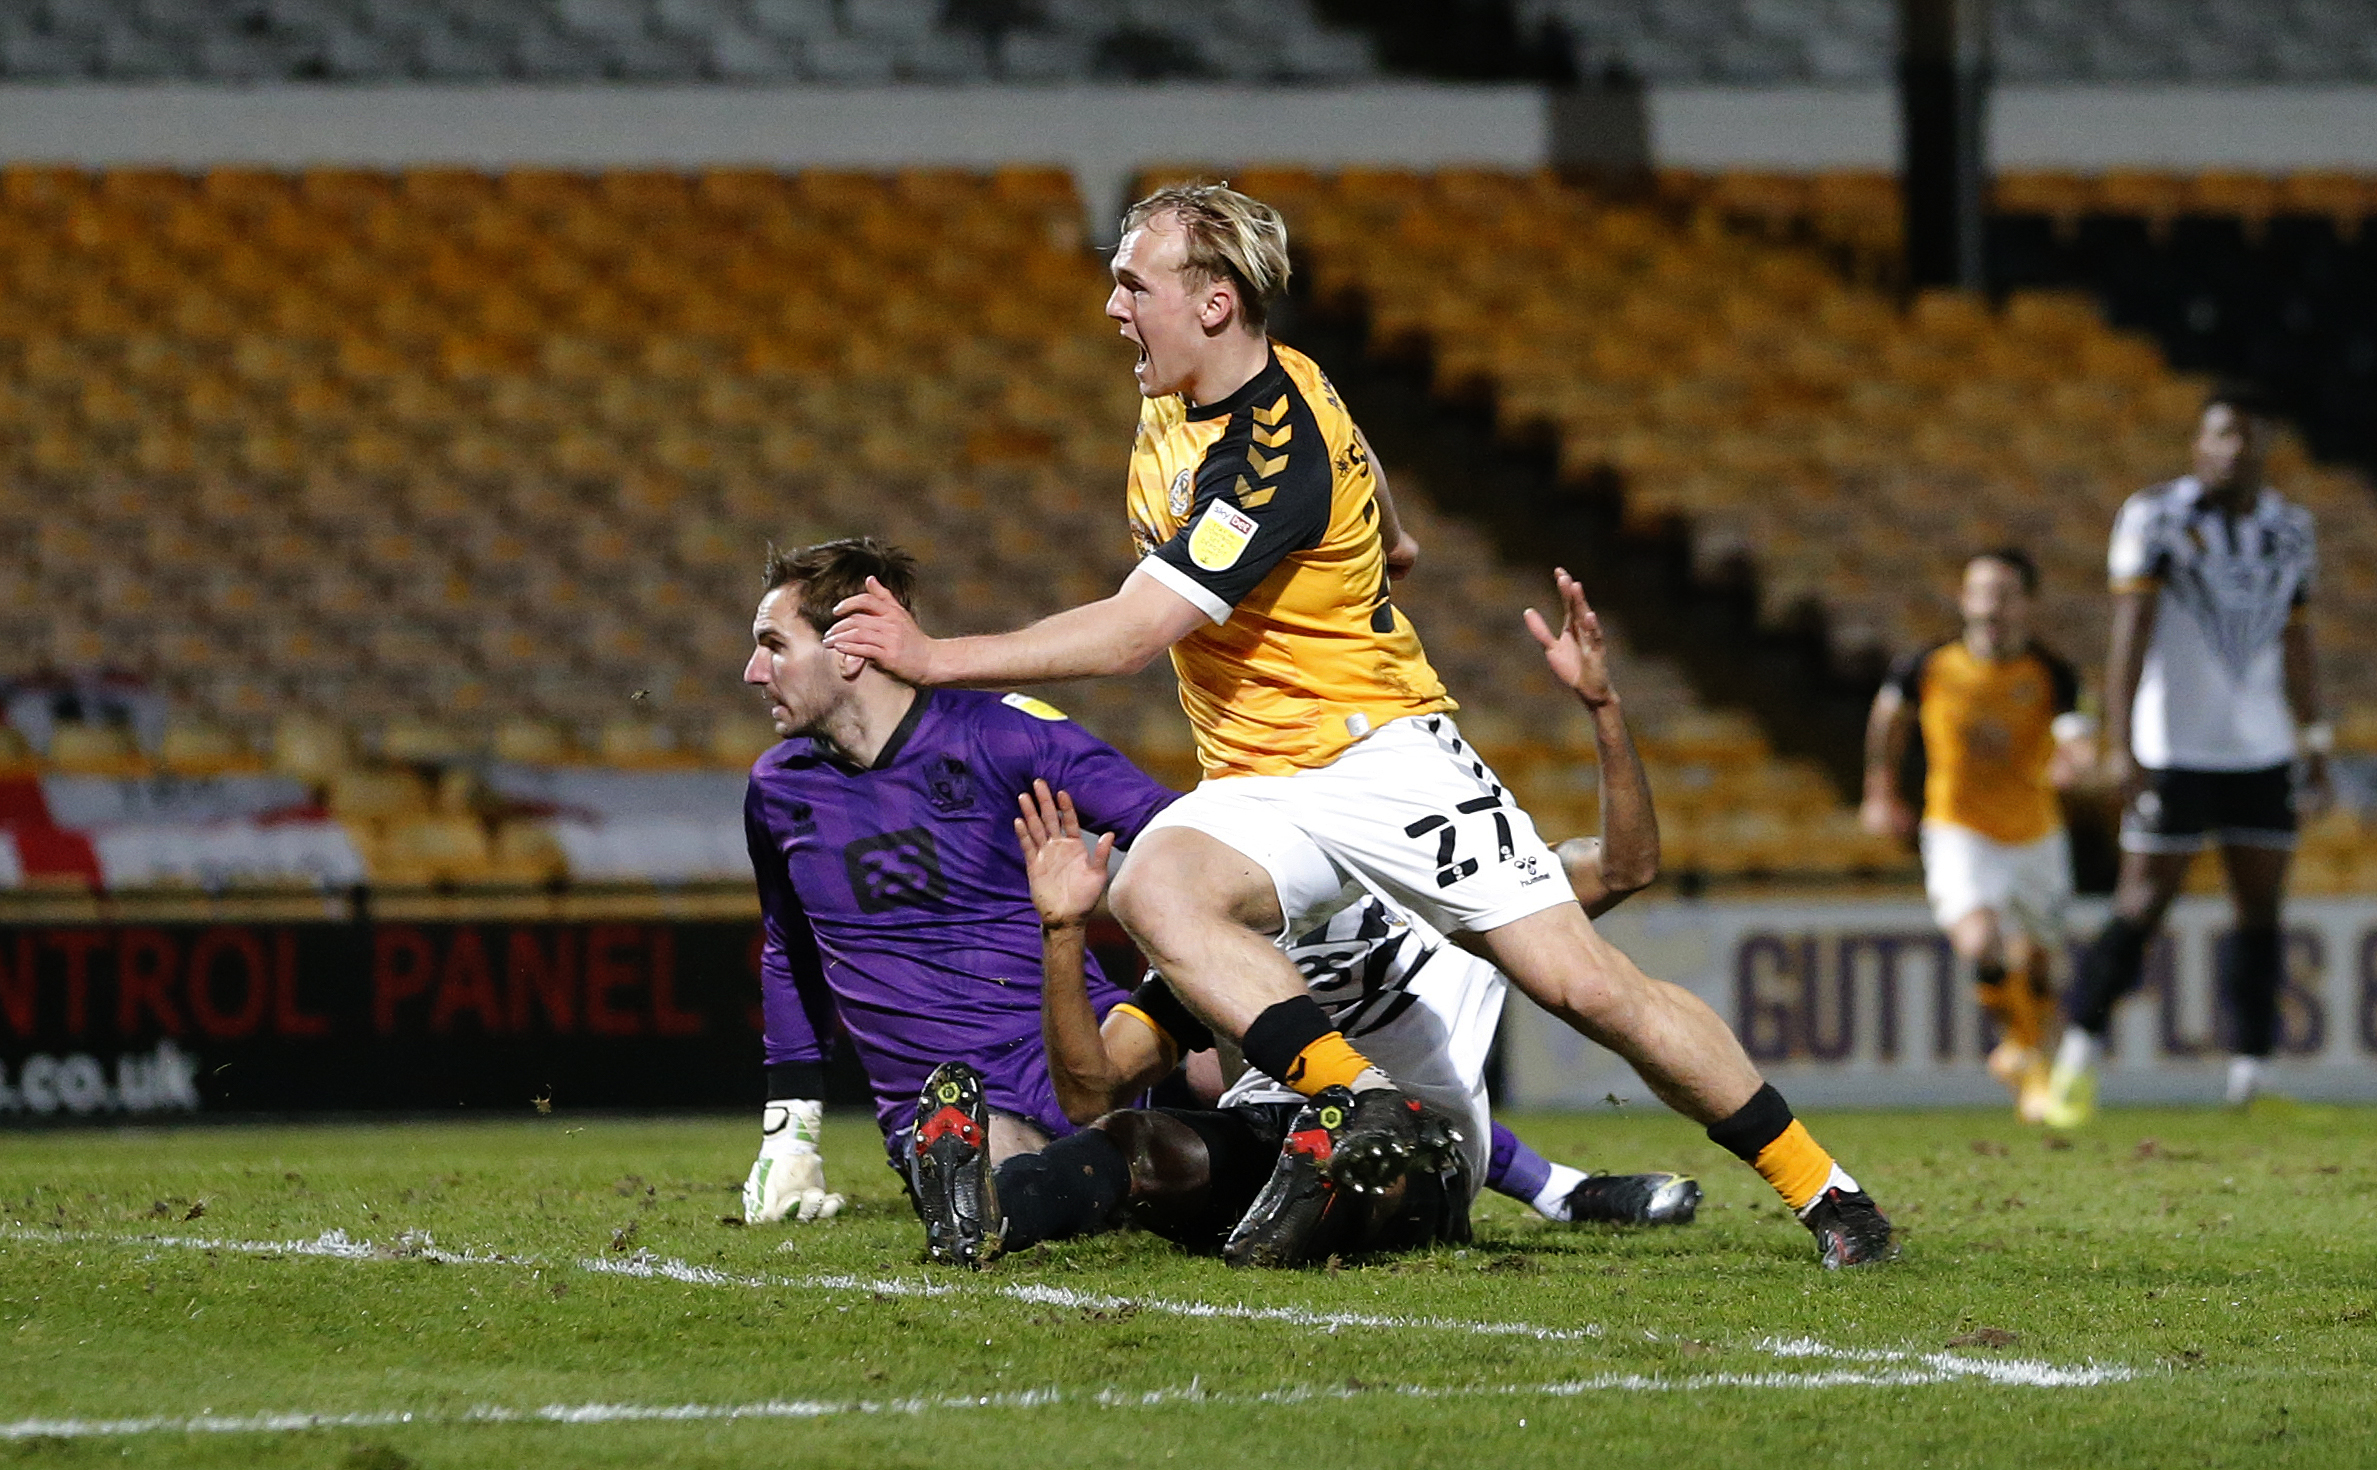 16.03.21 - Port Vale v Newport County - Sky Bet League 2 - Jack Scrimshaw of Newport County shoots past Cristian Montano of Port Vale and Goalkeeper Scott Brown of Port Vale to score their 1st goal